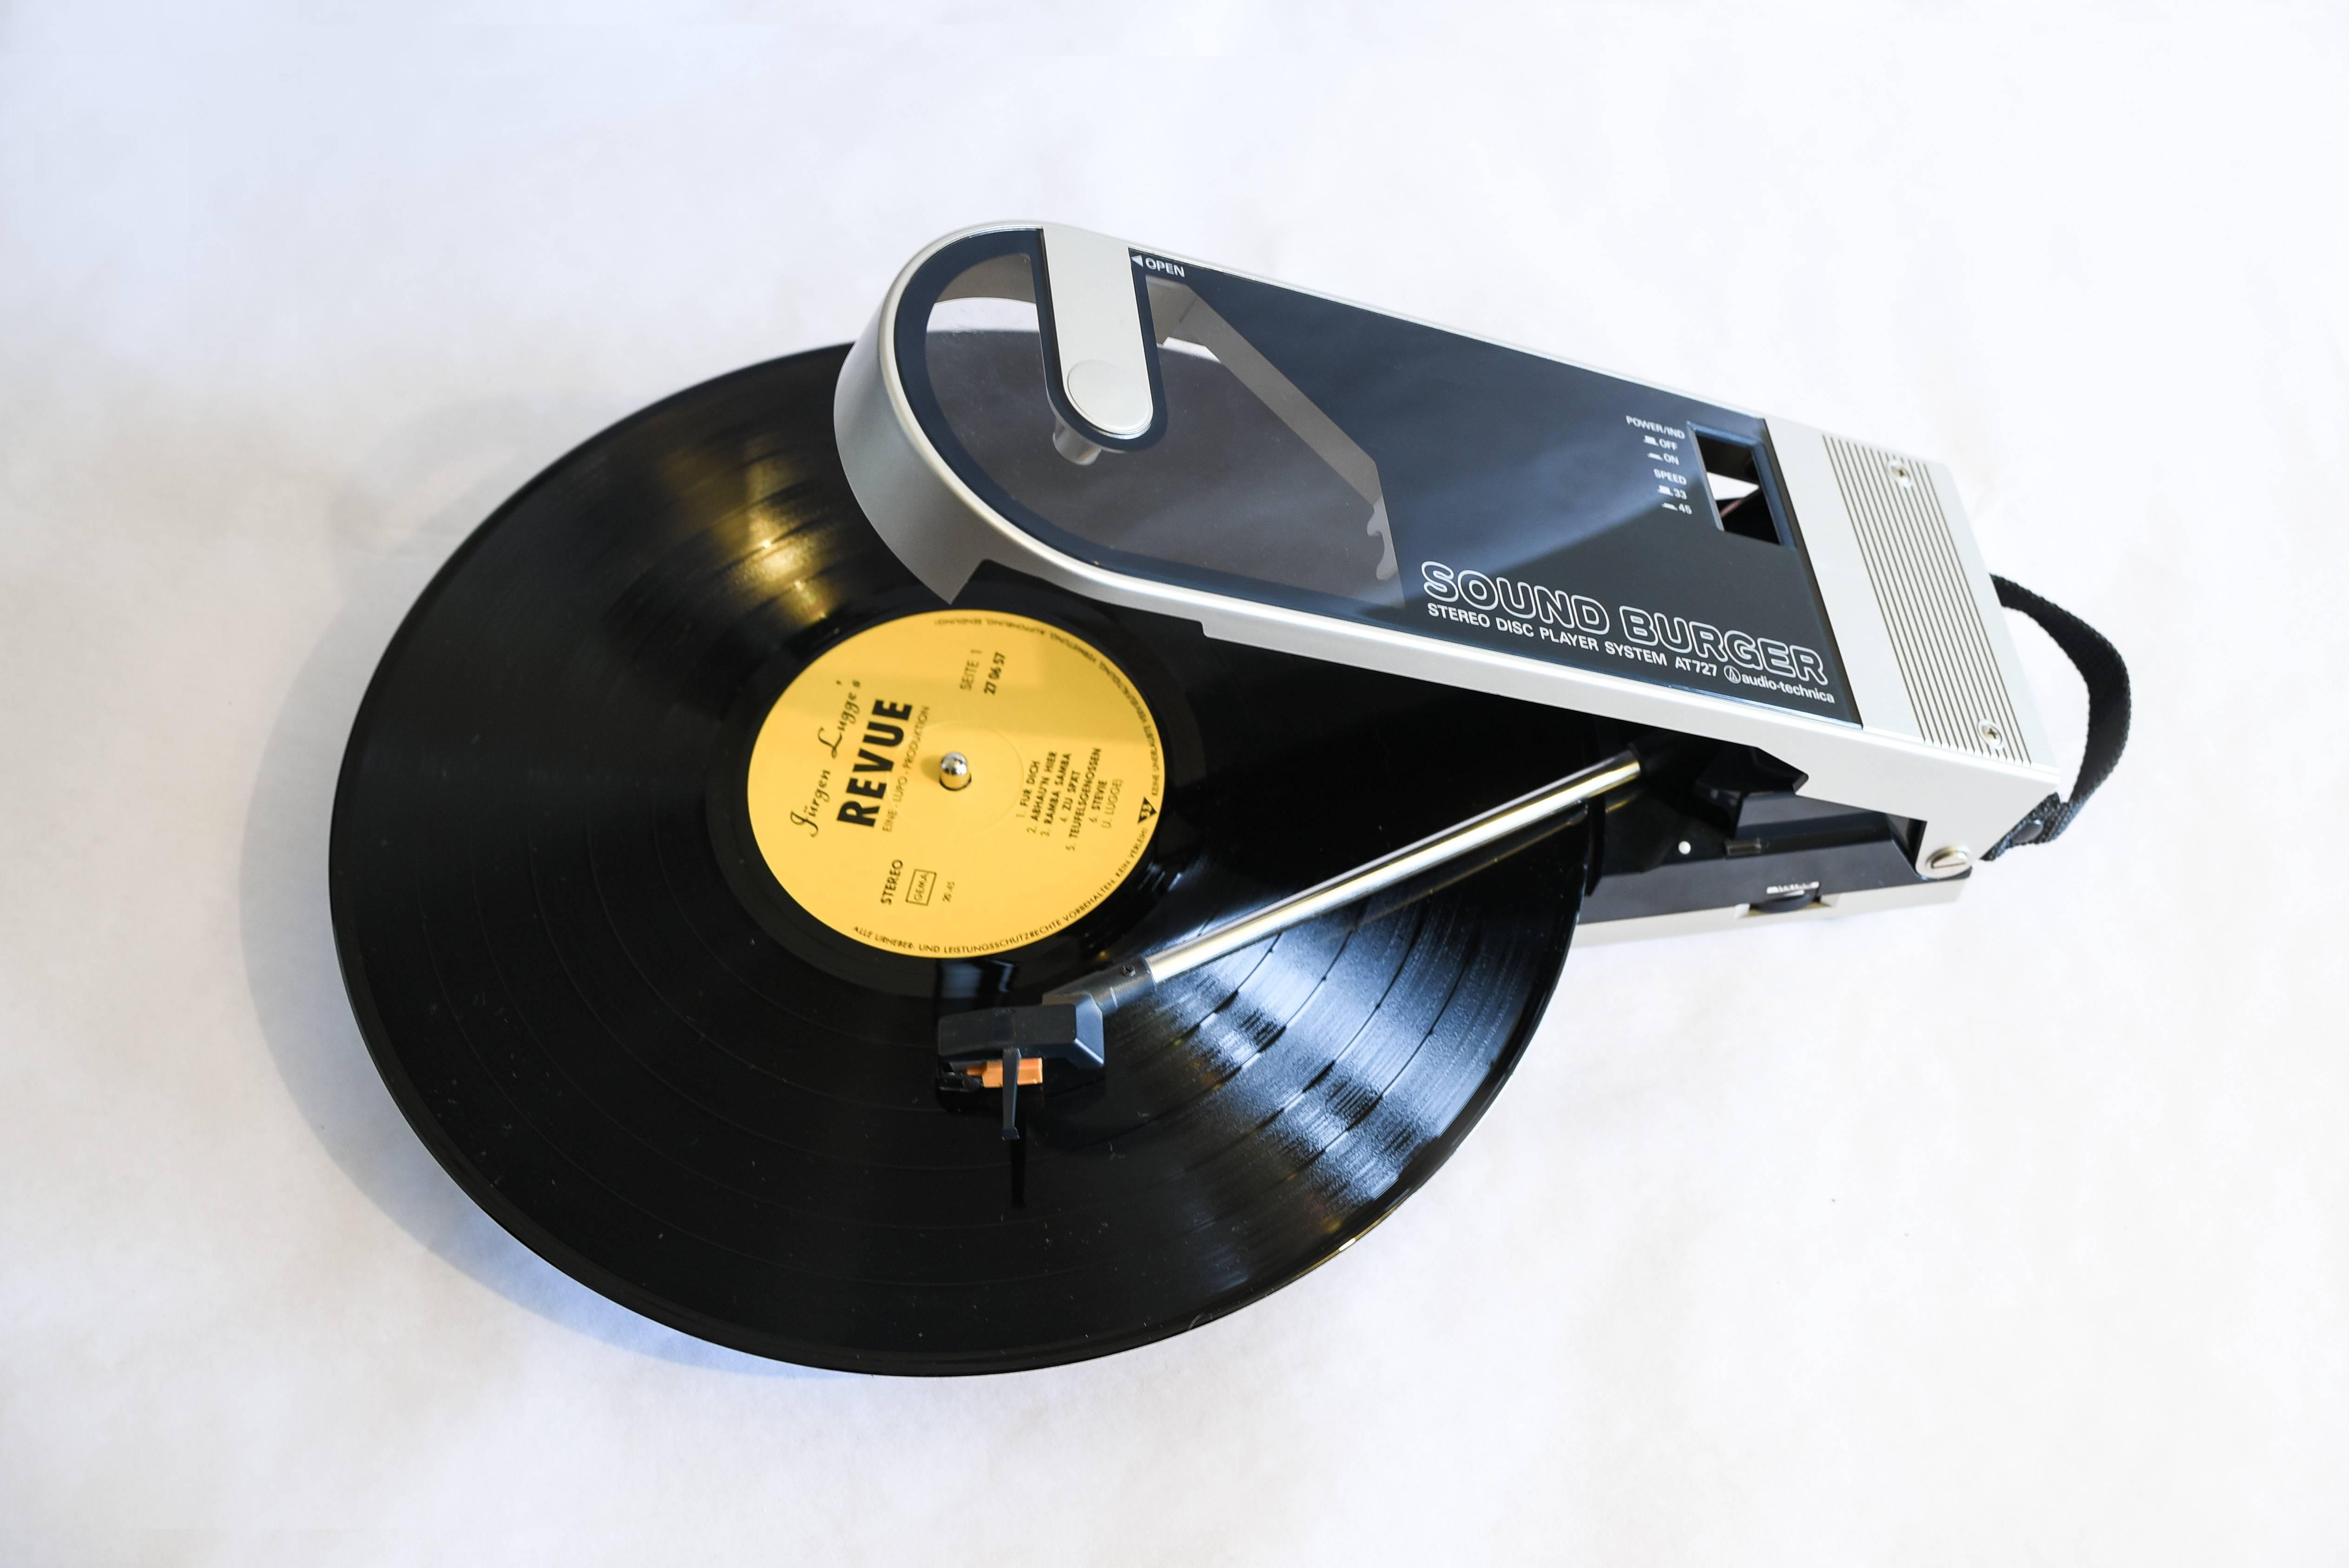 -Vintage Sound Burger AT 727 portable record player from Audio Technica.
NOS original packaging, the cartridge and belt were restored.
Designed to be played flat like a normal turntable, manual arm so skipping between tracks is fast. Platter: 90mm